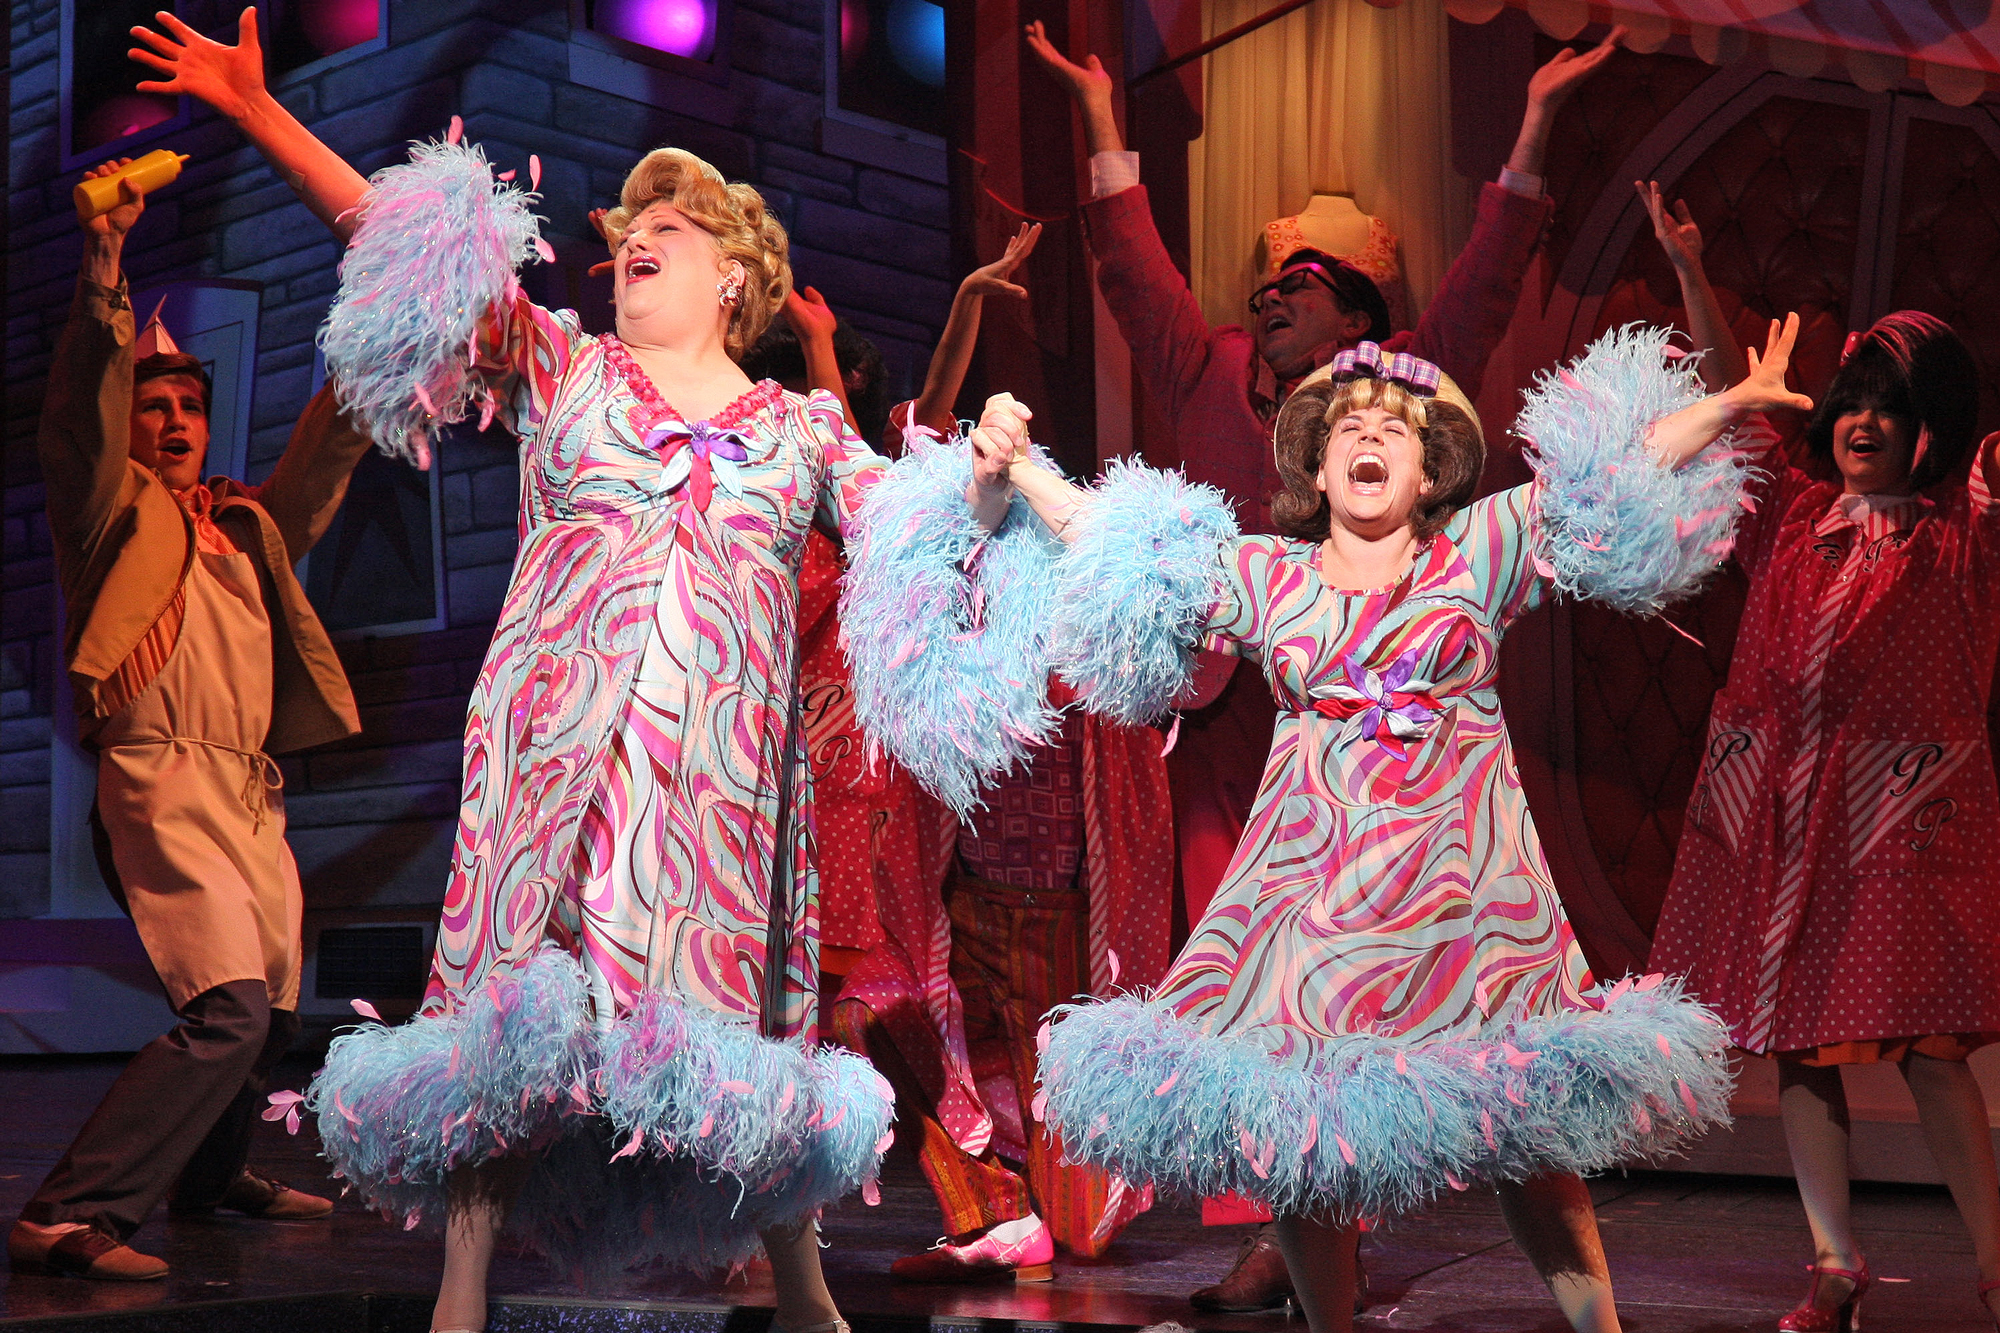 Harvey Fierstein and Marissa Jaret Winokur perform as Winokur returns to her Tony winning role as Tracy Turnblad in the hit musical "Hairspray" on Broadway at the Neil Simon Theatre on December 10, 2008 in New York City.